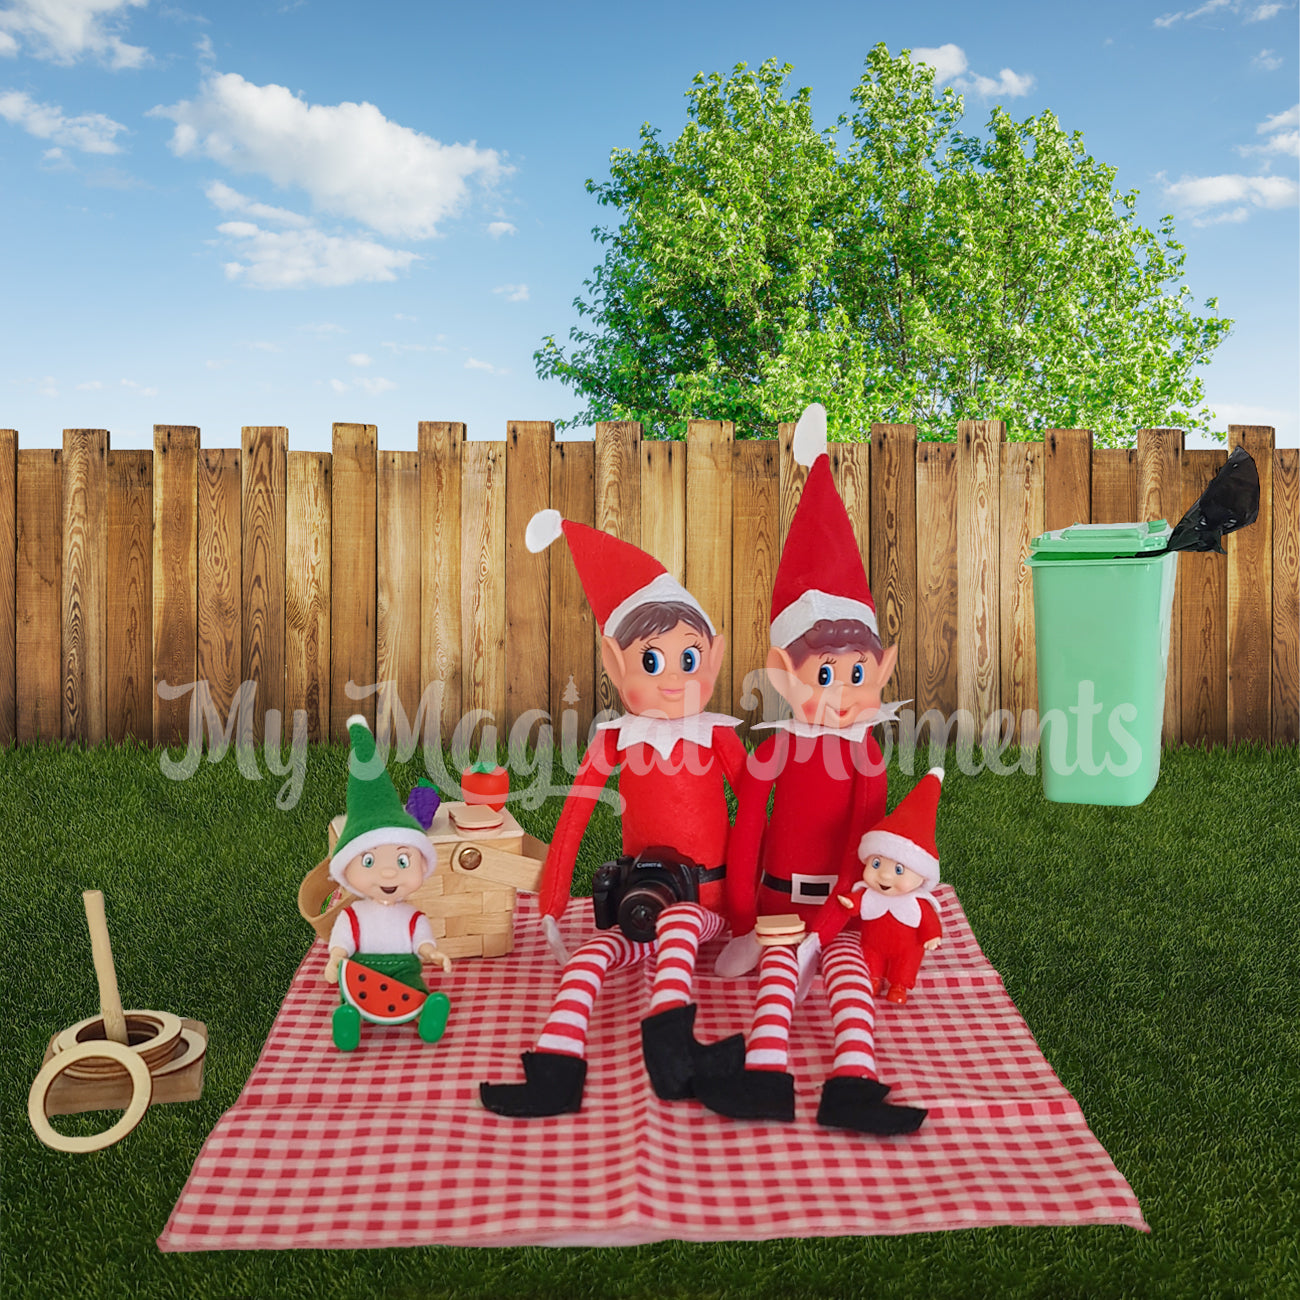 Elf picnic with elf baby and toddler